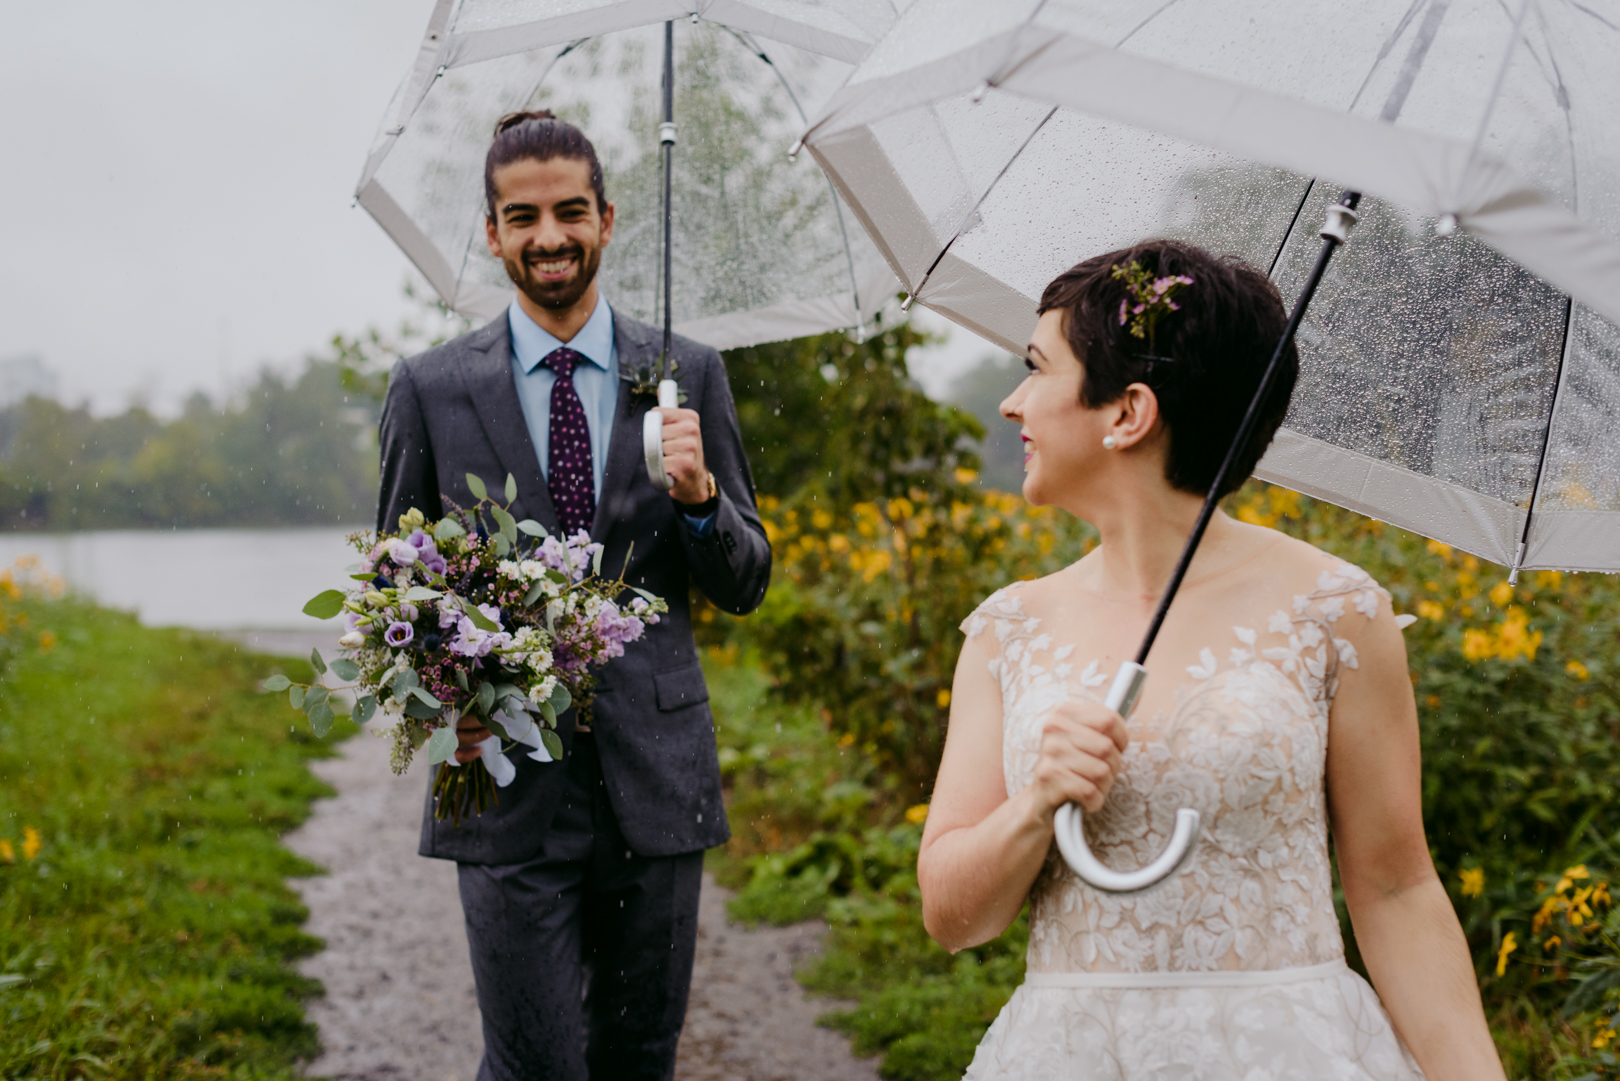 groom holding bouquet of flowers walking in the rain with umbrellas